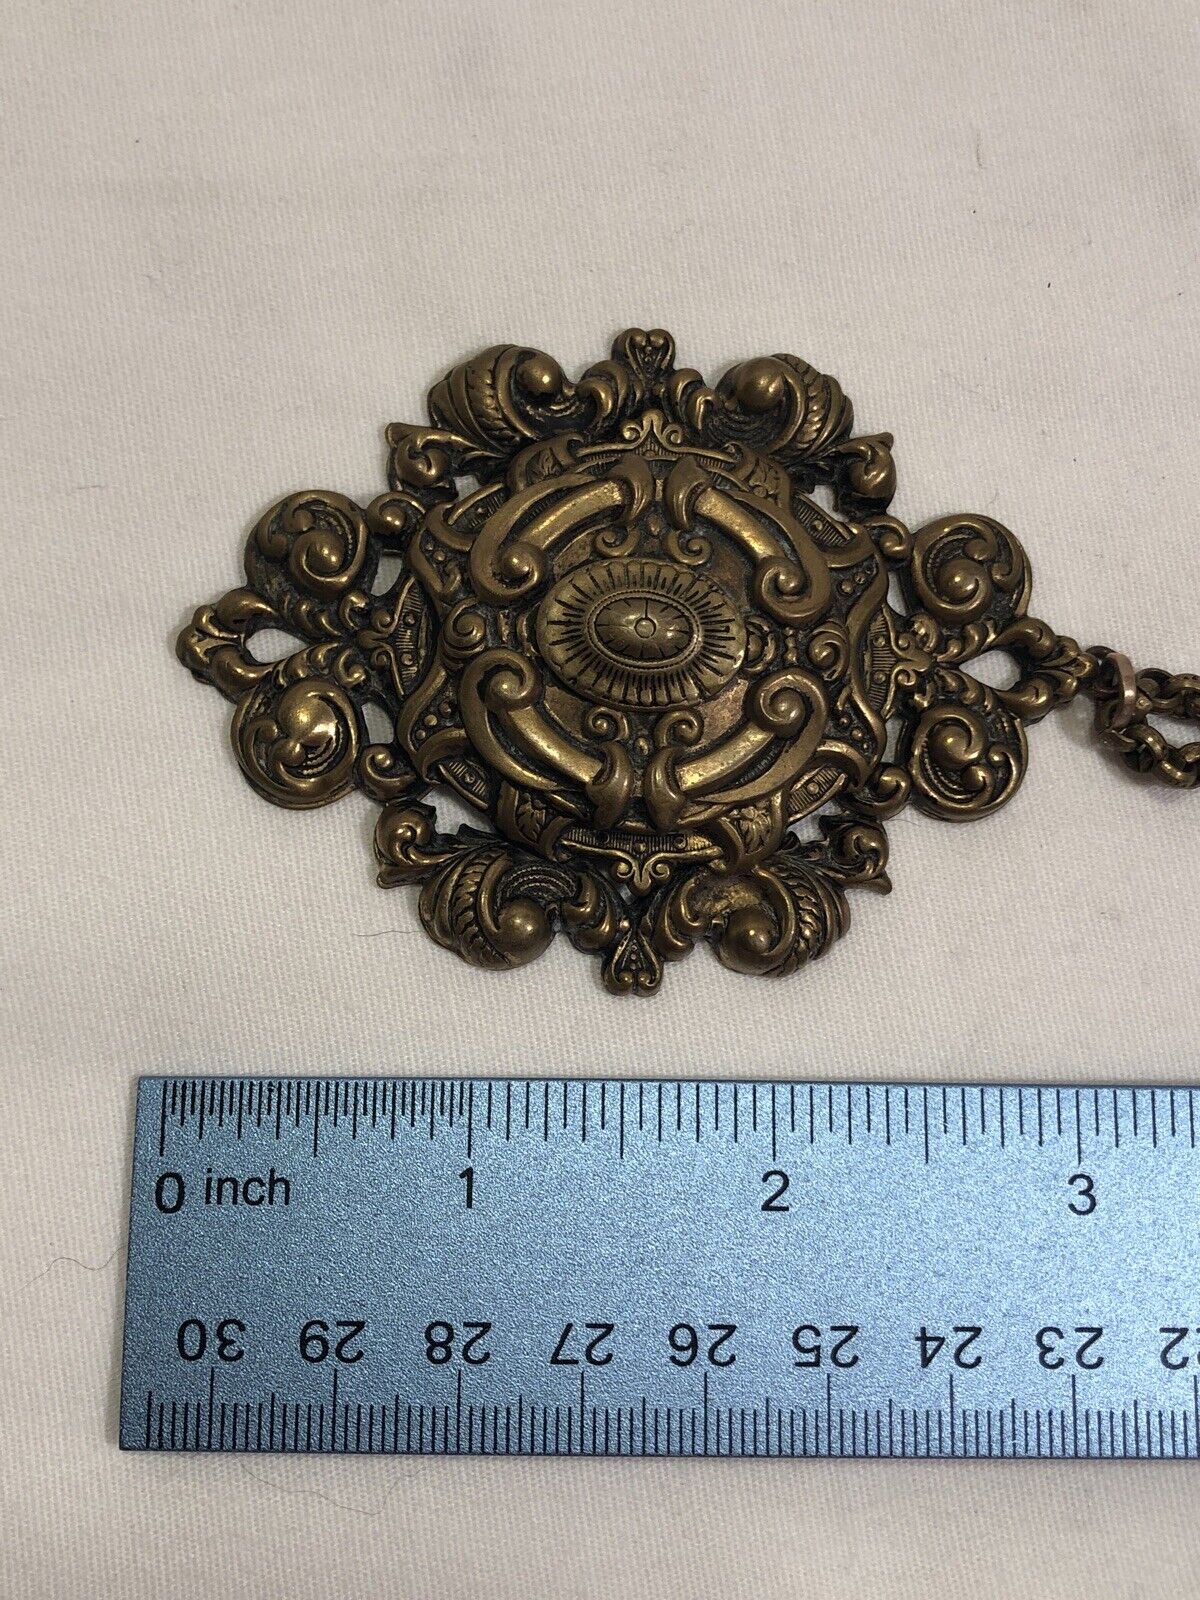 VICTORIAN GOLD PENDANT AND CHAIN - image 6